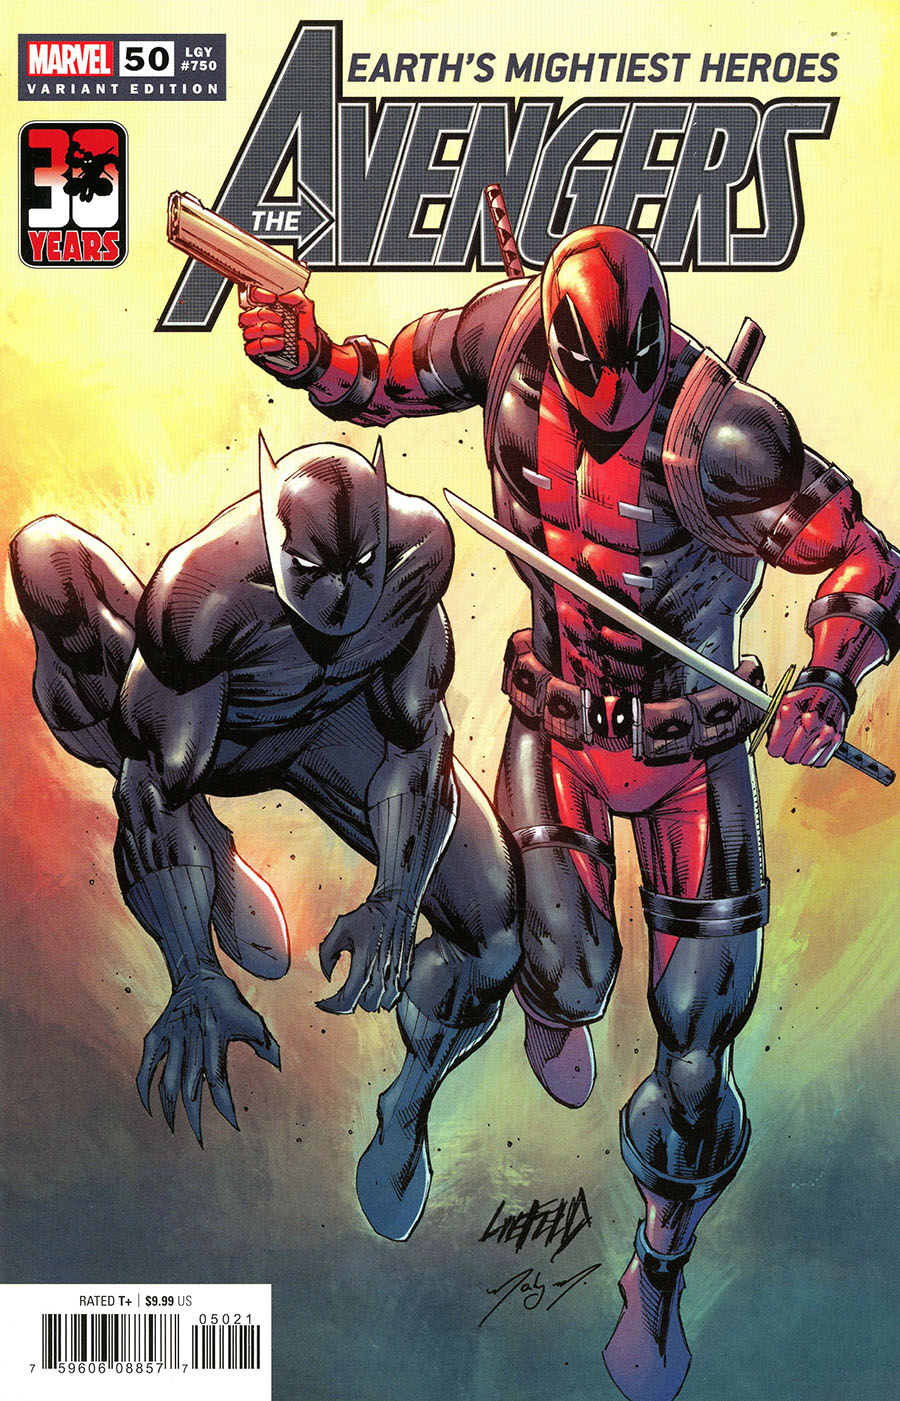 Avengers Vol 7 #50 Cover C Variant Rob Liefeld Deadpool 30th Anniversary Cover (#750)